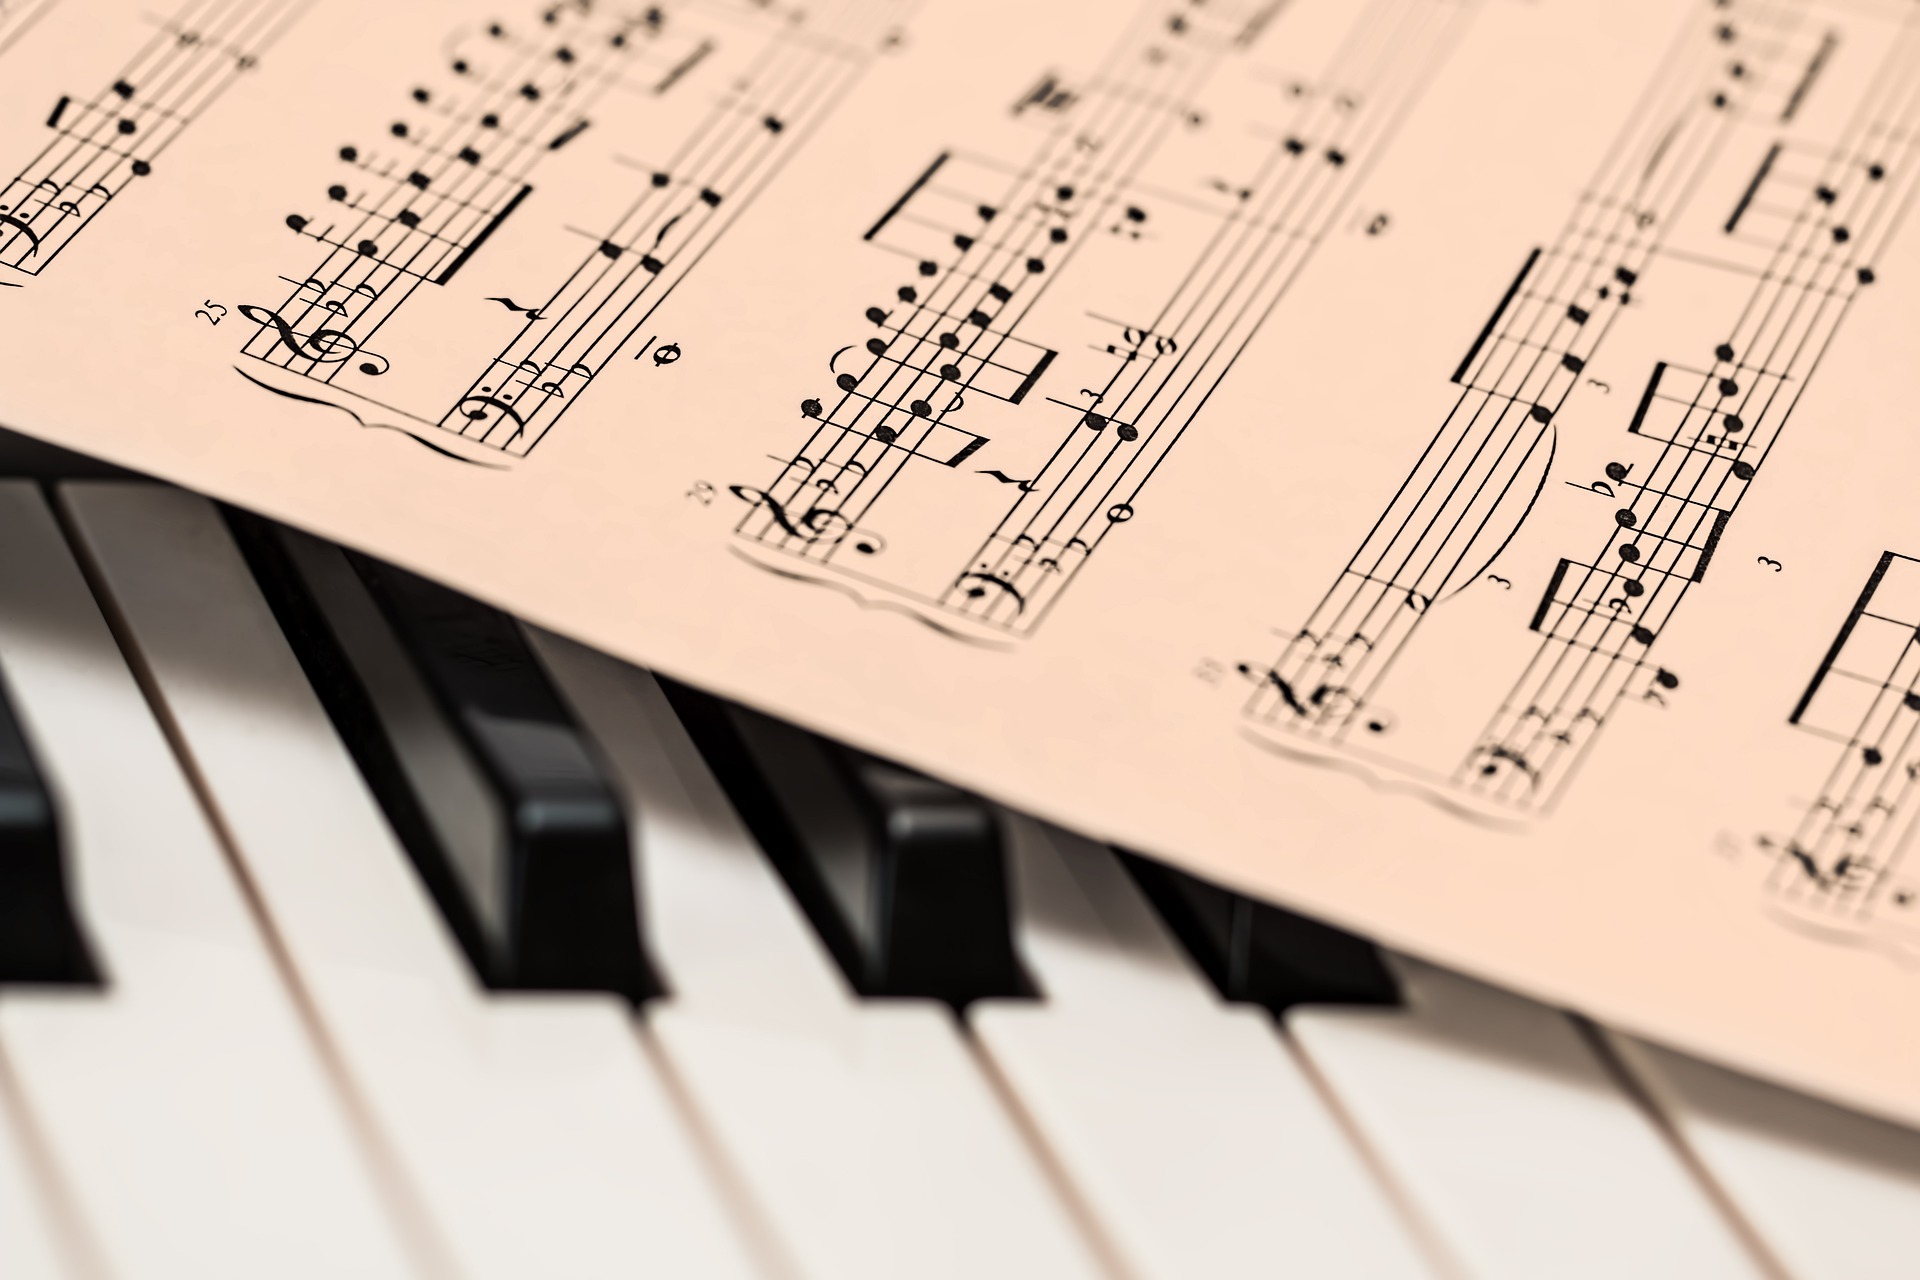 Learn to read music to master your Piano skills